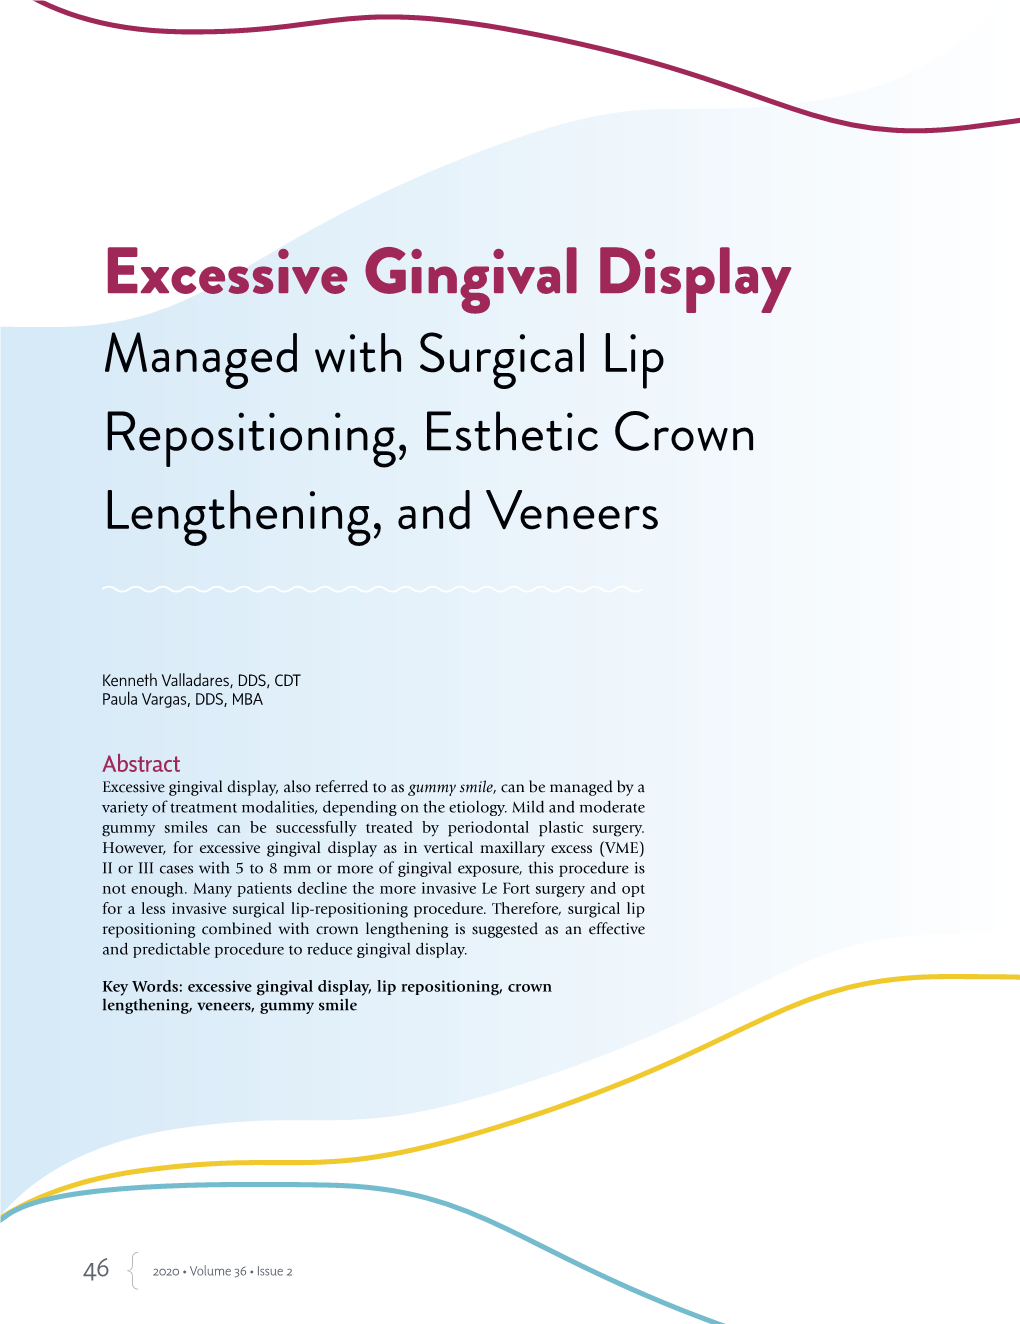 Excessive Gingival Display Managed with Surgical Lip Repositioning, Esthetic Crown Lengthening, and Veneers